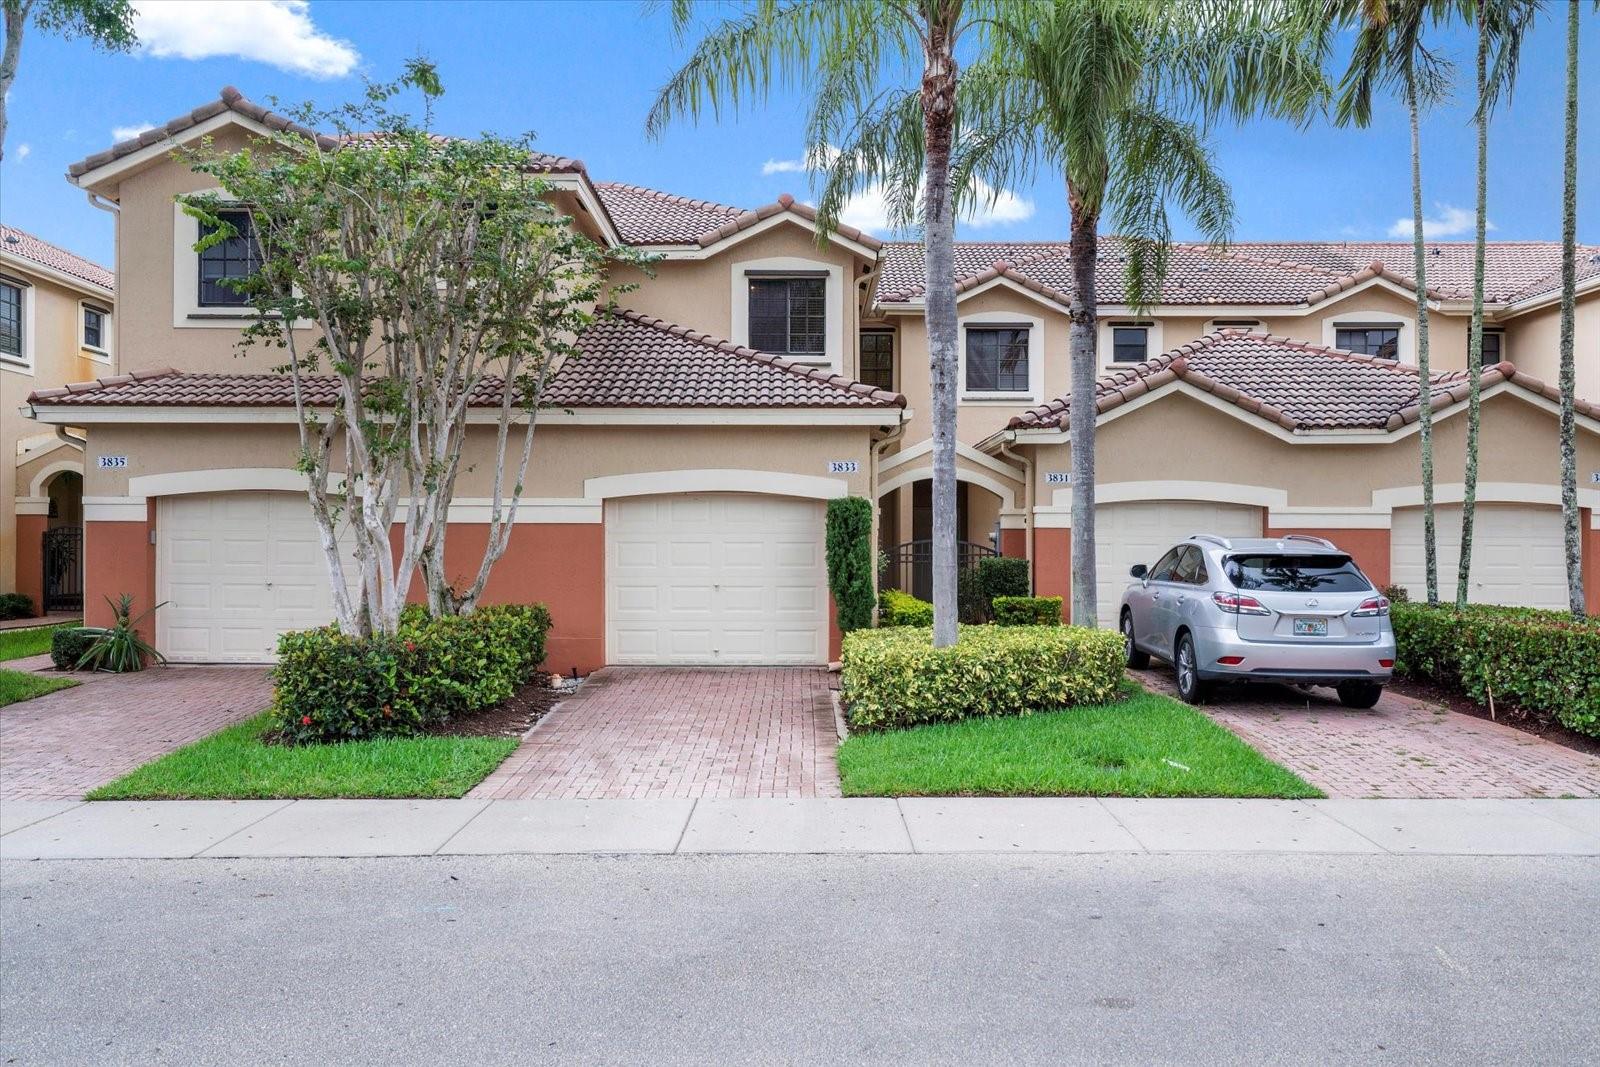 Rare opportunity! Within minutes walking distance to A+ schools - Falcon Cove Middle School and Cypress Bay High School. Well maintained townhouse, Enjoy the spacious layout with 3 bedrooms, 2.5 baths, and a one-car garage. Highlights include laundry facilities, tile flooring on the 1st floor, and high-quality wood floors on the 2nd floor. Relax in the screened patio overlooking the quiet and private backyard. Located in the highly sought-after City of Weston, with a park right in front and ample parking. Enjoy easy access to amenities like the library, community pool, and Manatee Bay Elementary. Close to major highways for added convenience.